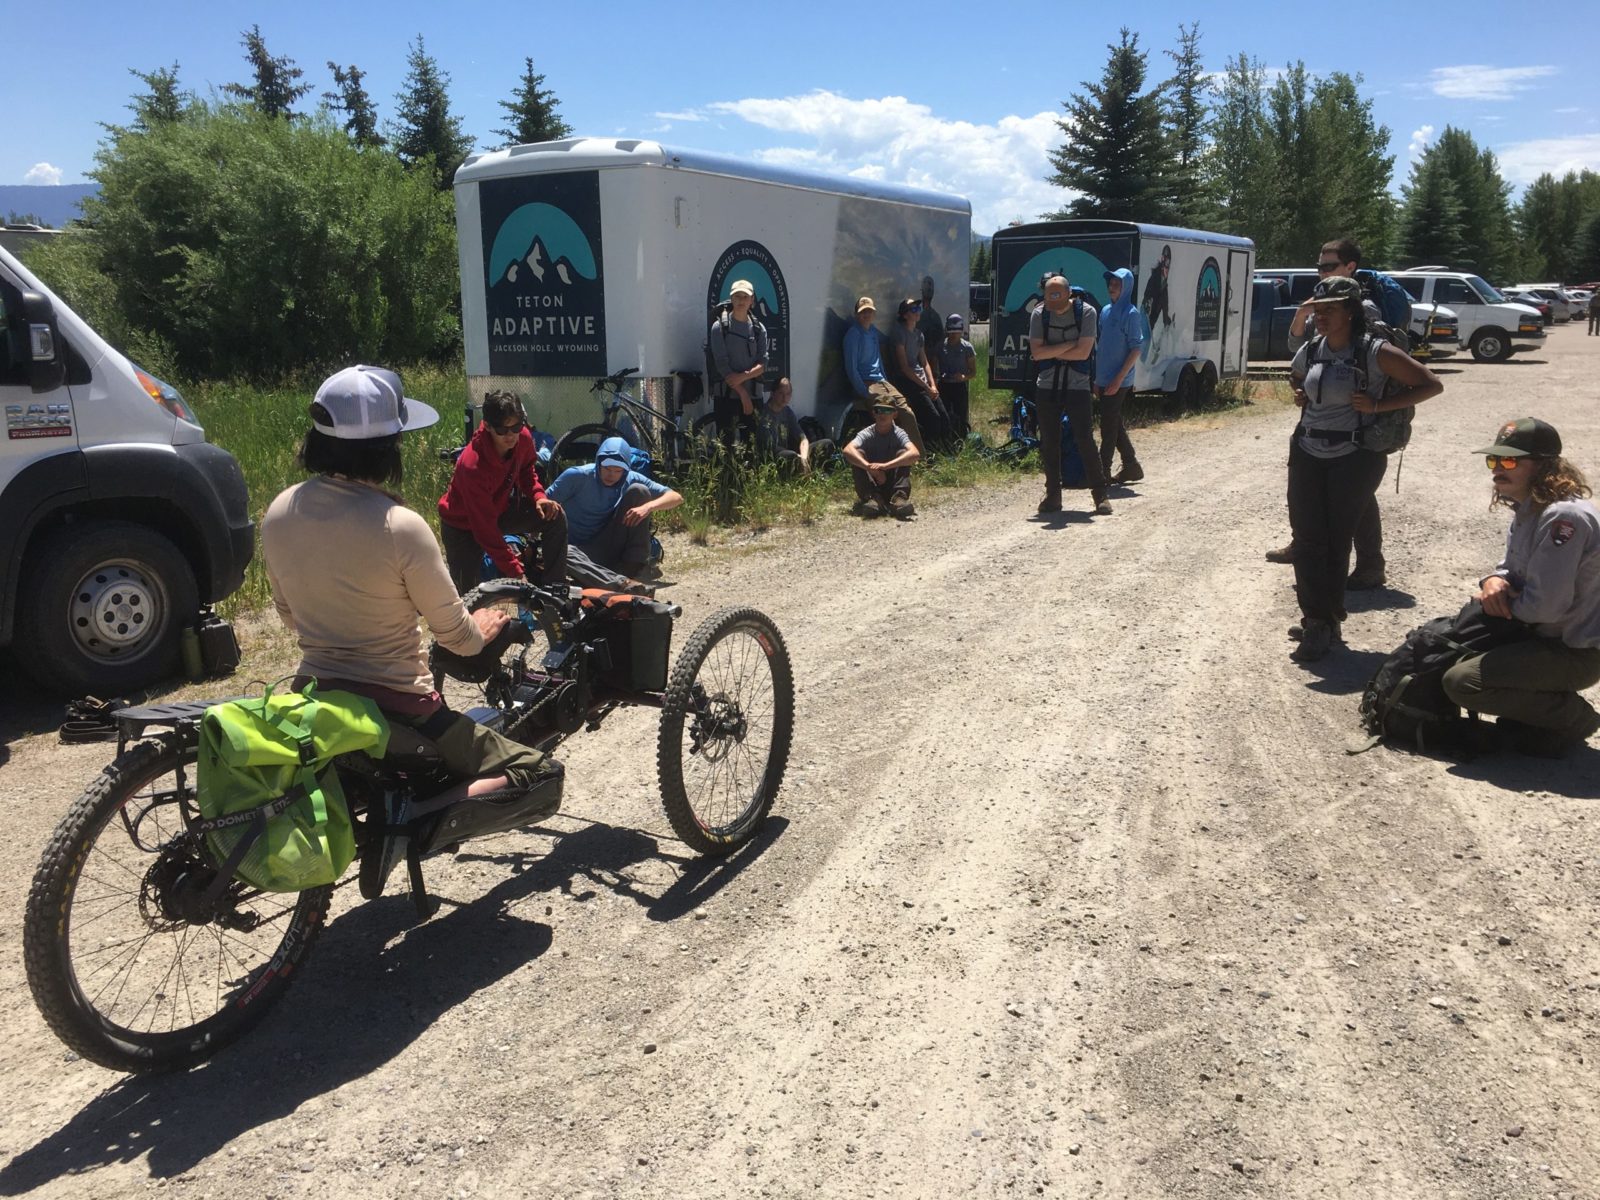 YCP spent a day with Teton Adaptive learning about accessibility improvements to park trails that allow people who use various mobility devices to experience Grand Teton's backcountry.